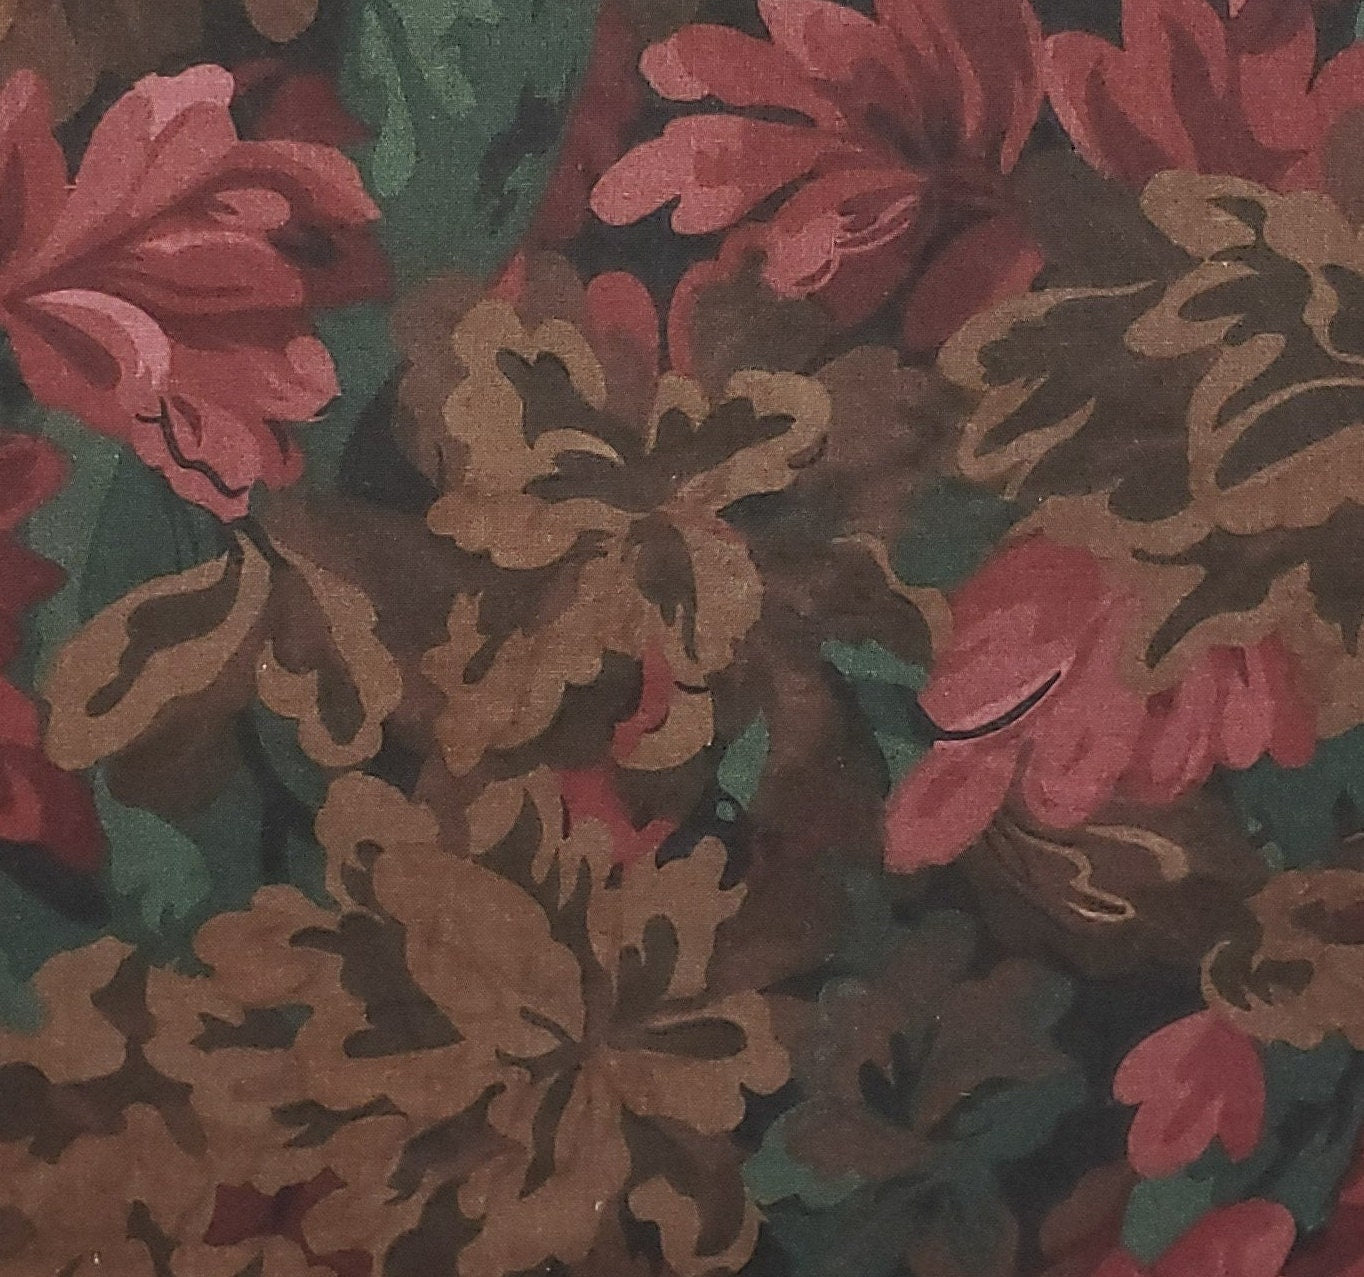 Bordeau by Jinny Beyer for RJR Fashion Fabrics - Black Fabric with Burgundy, Pink, Brown and Tan Large Flower Print